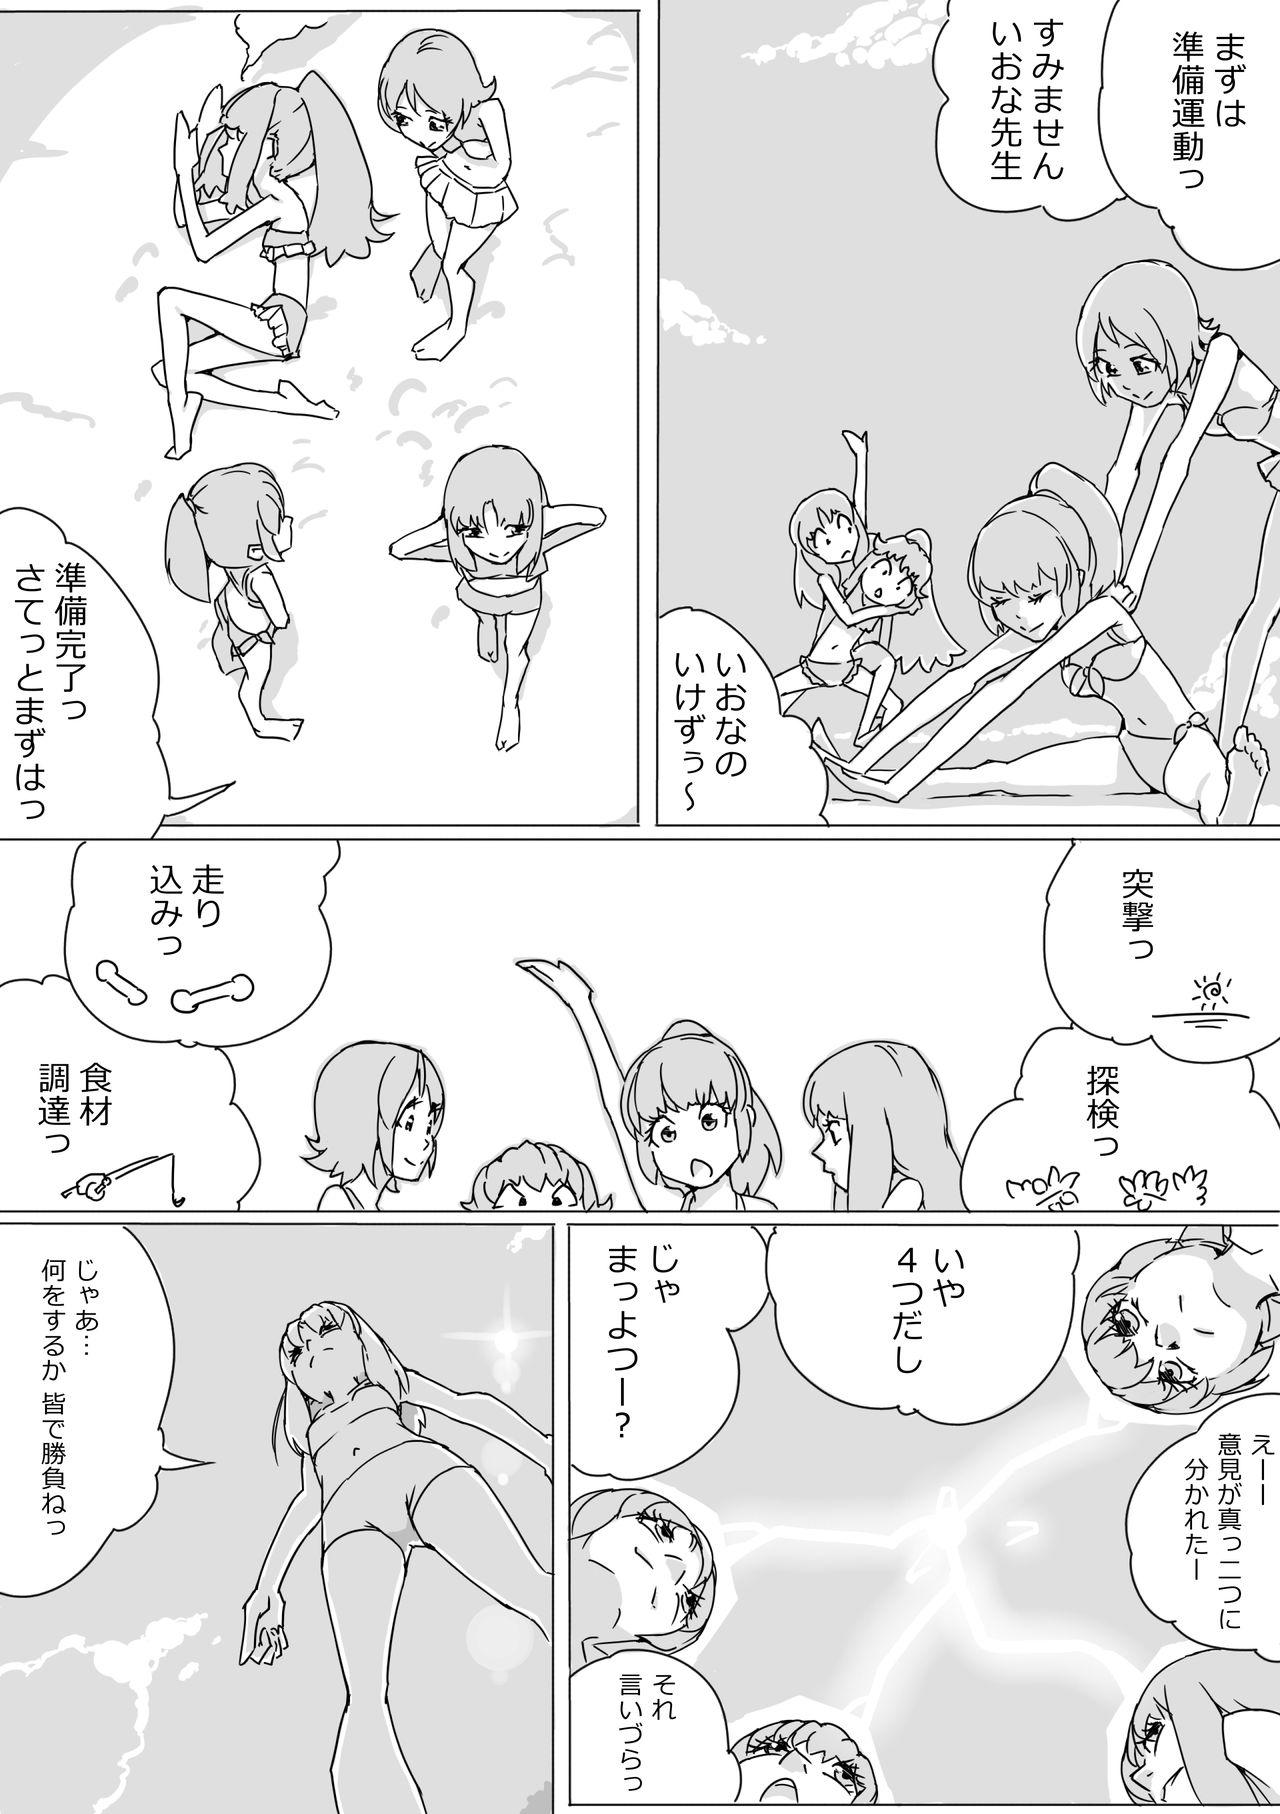 Family Roleplay Untitled Precure Doujinshi - Pretty cure Russia - Page 3